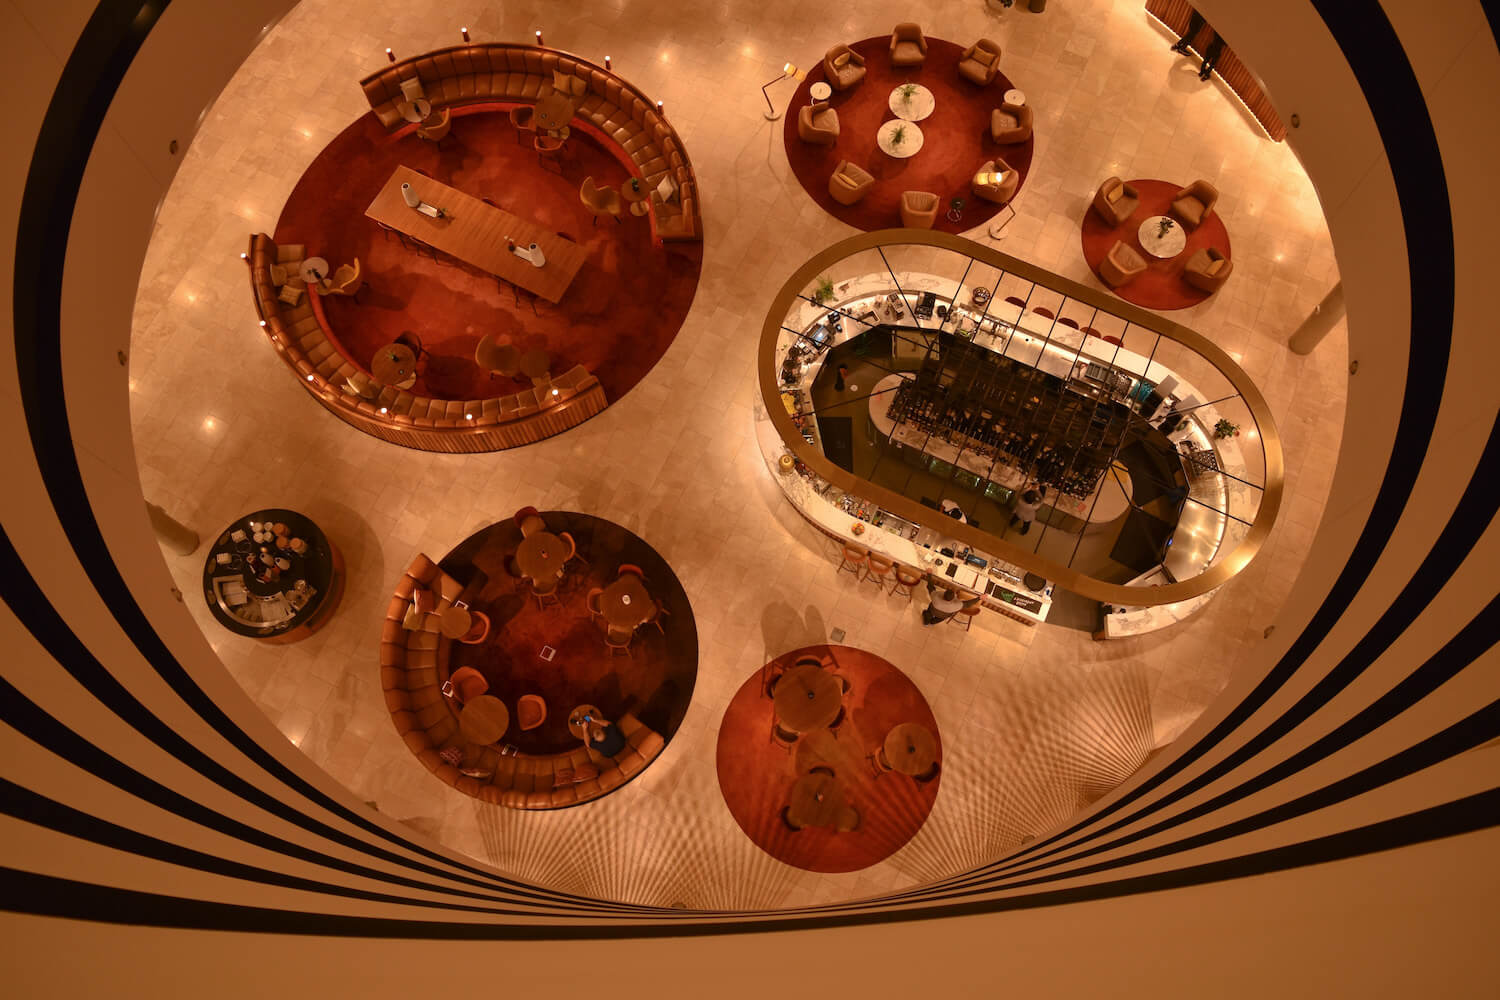 The hotel atrium from above